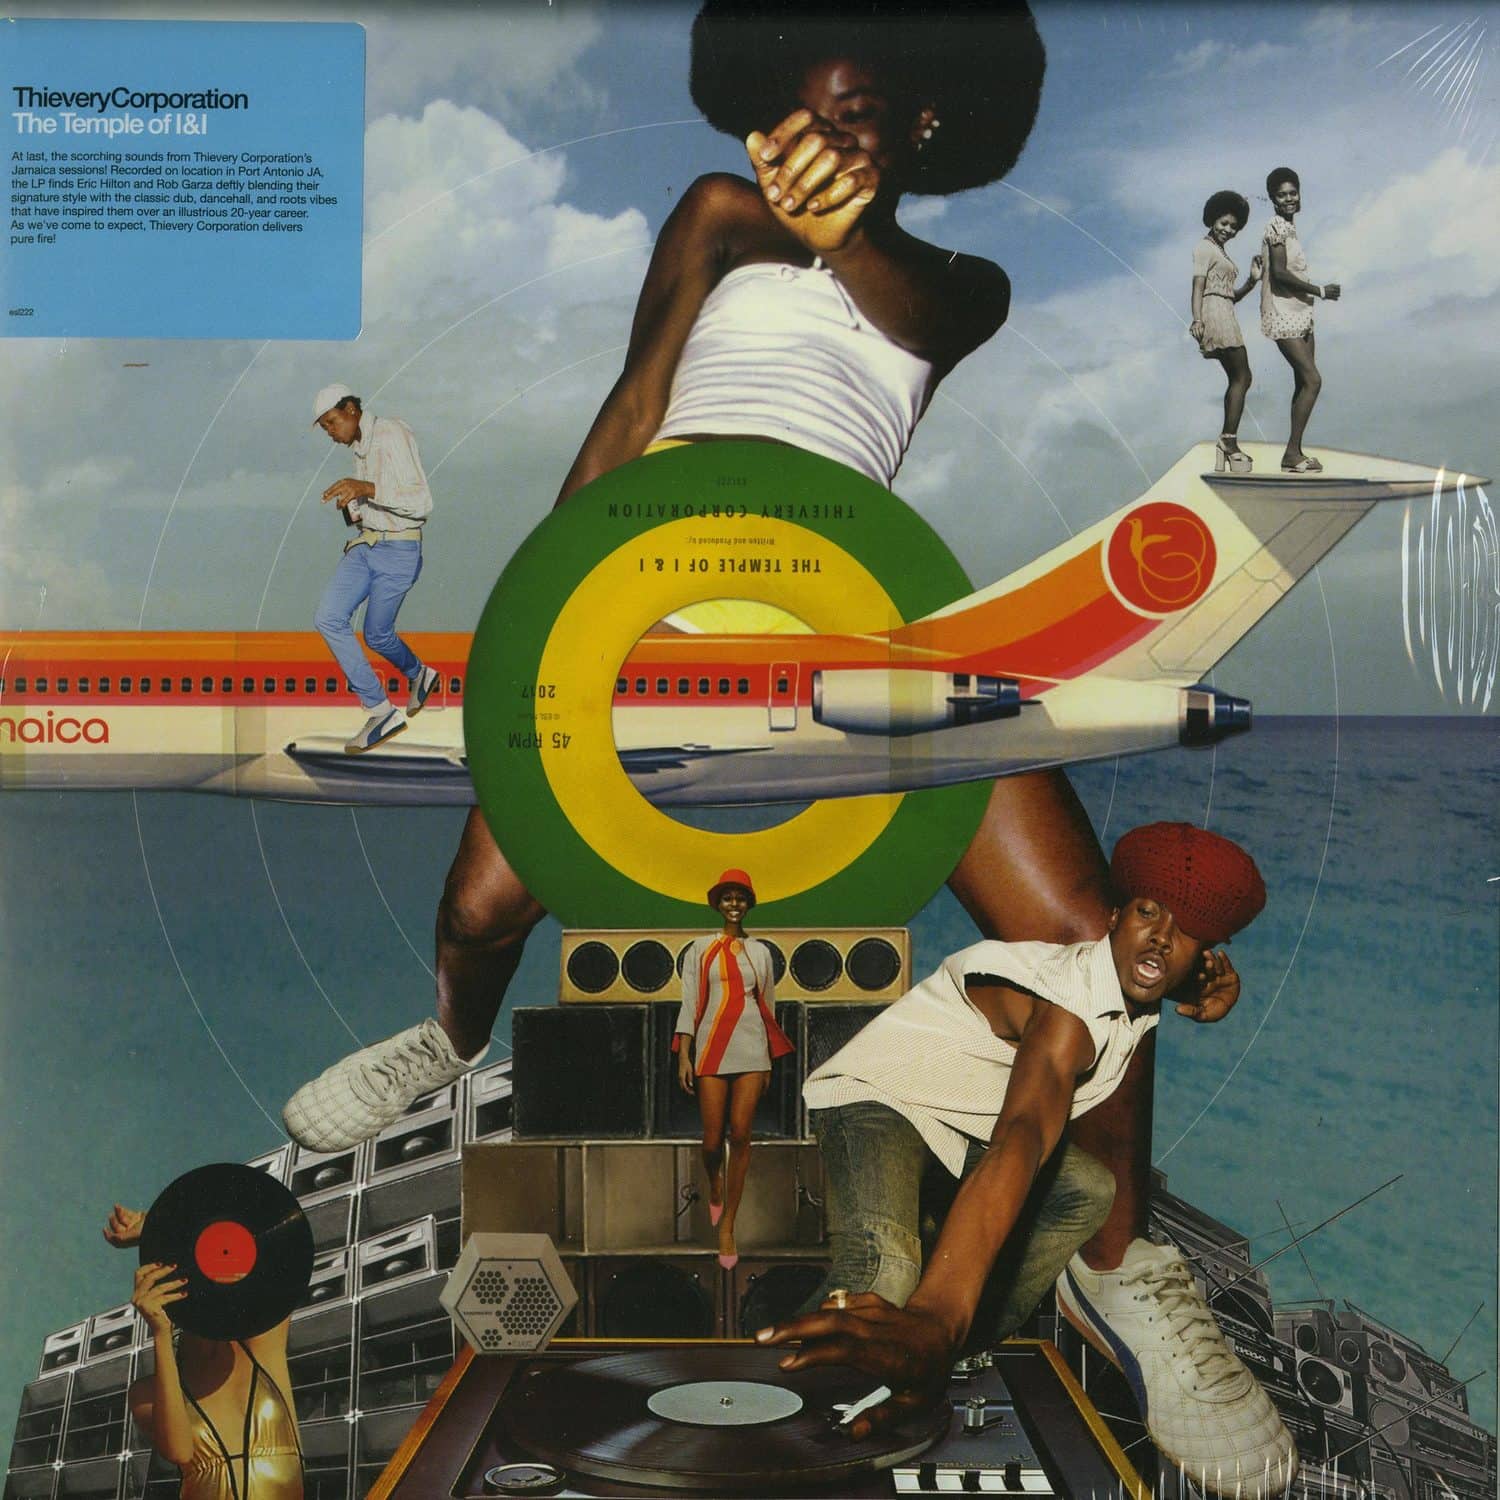 Thievery Corporation - THE TEMPLE OF I & I 